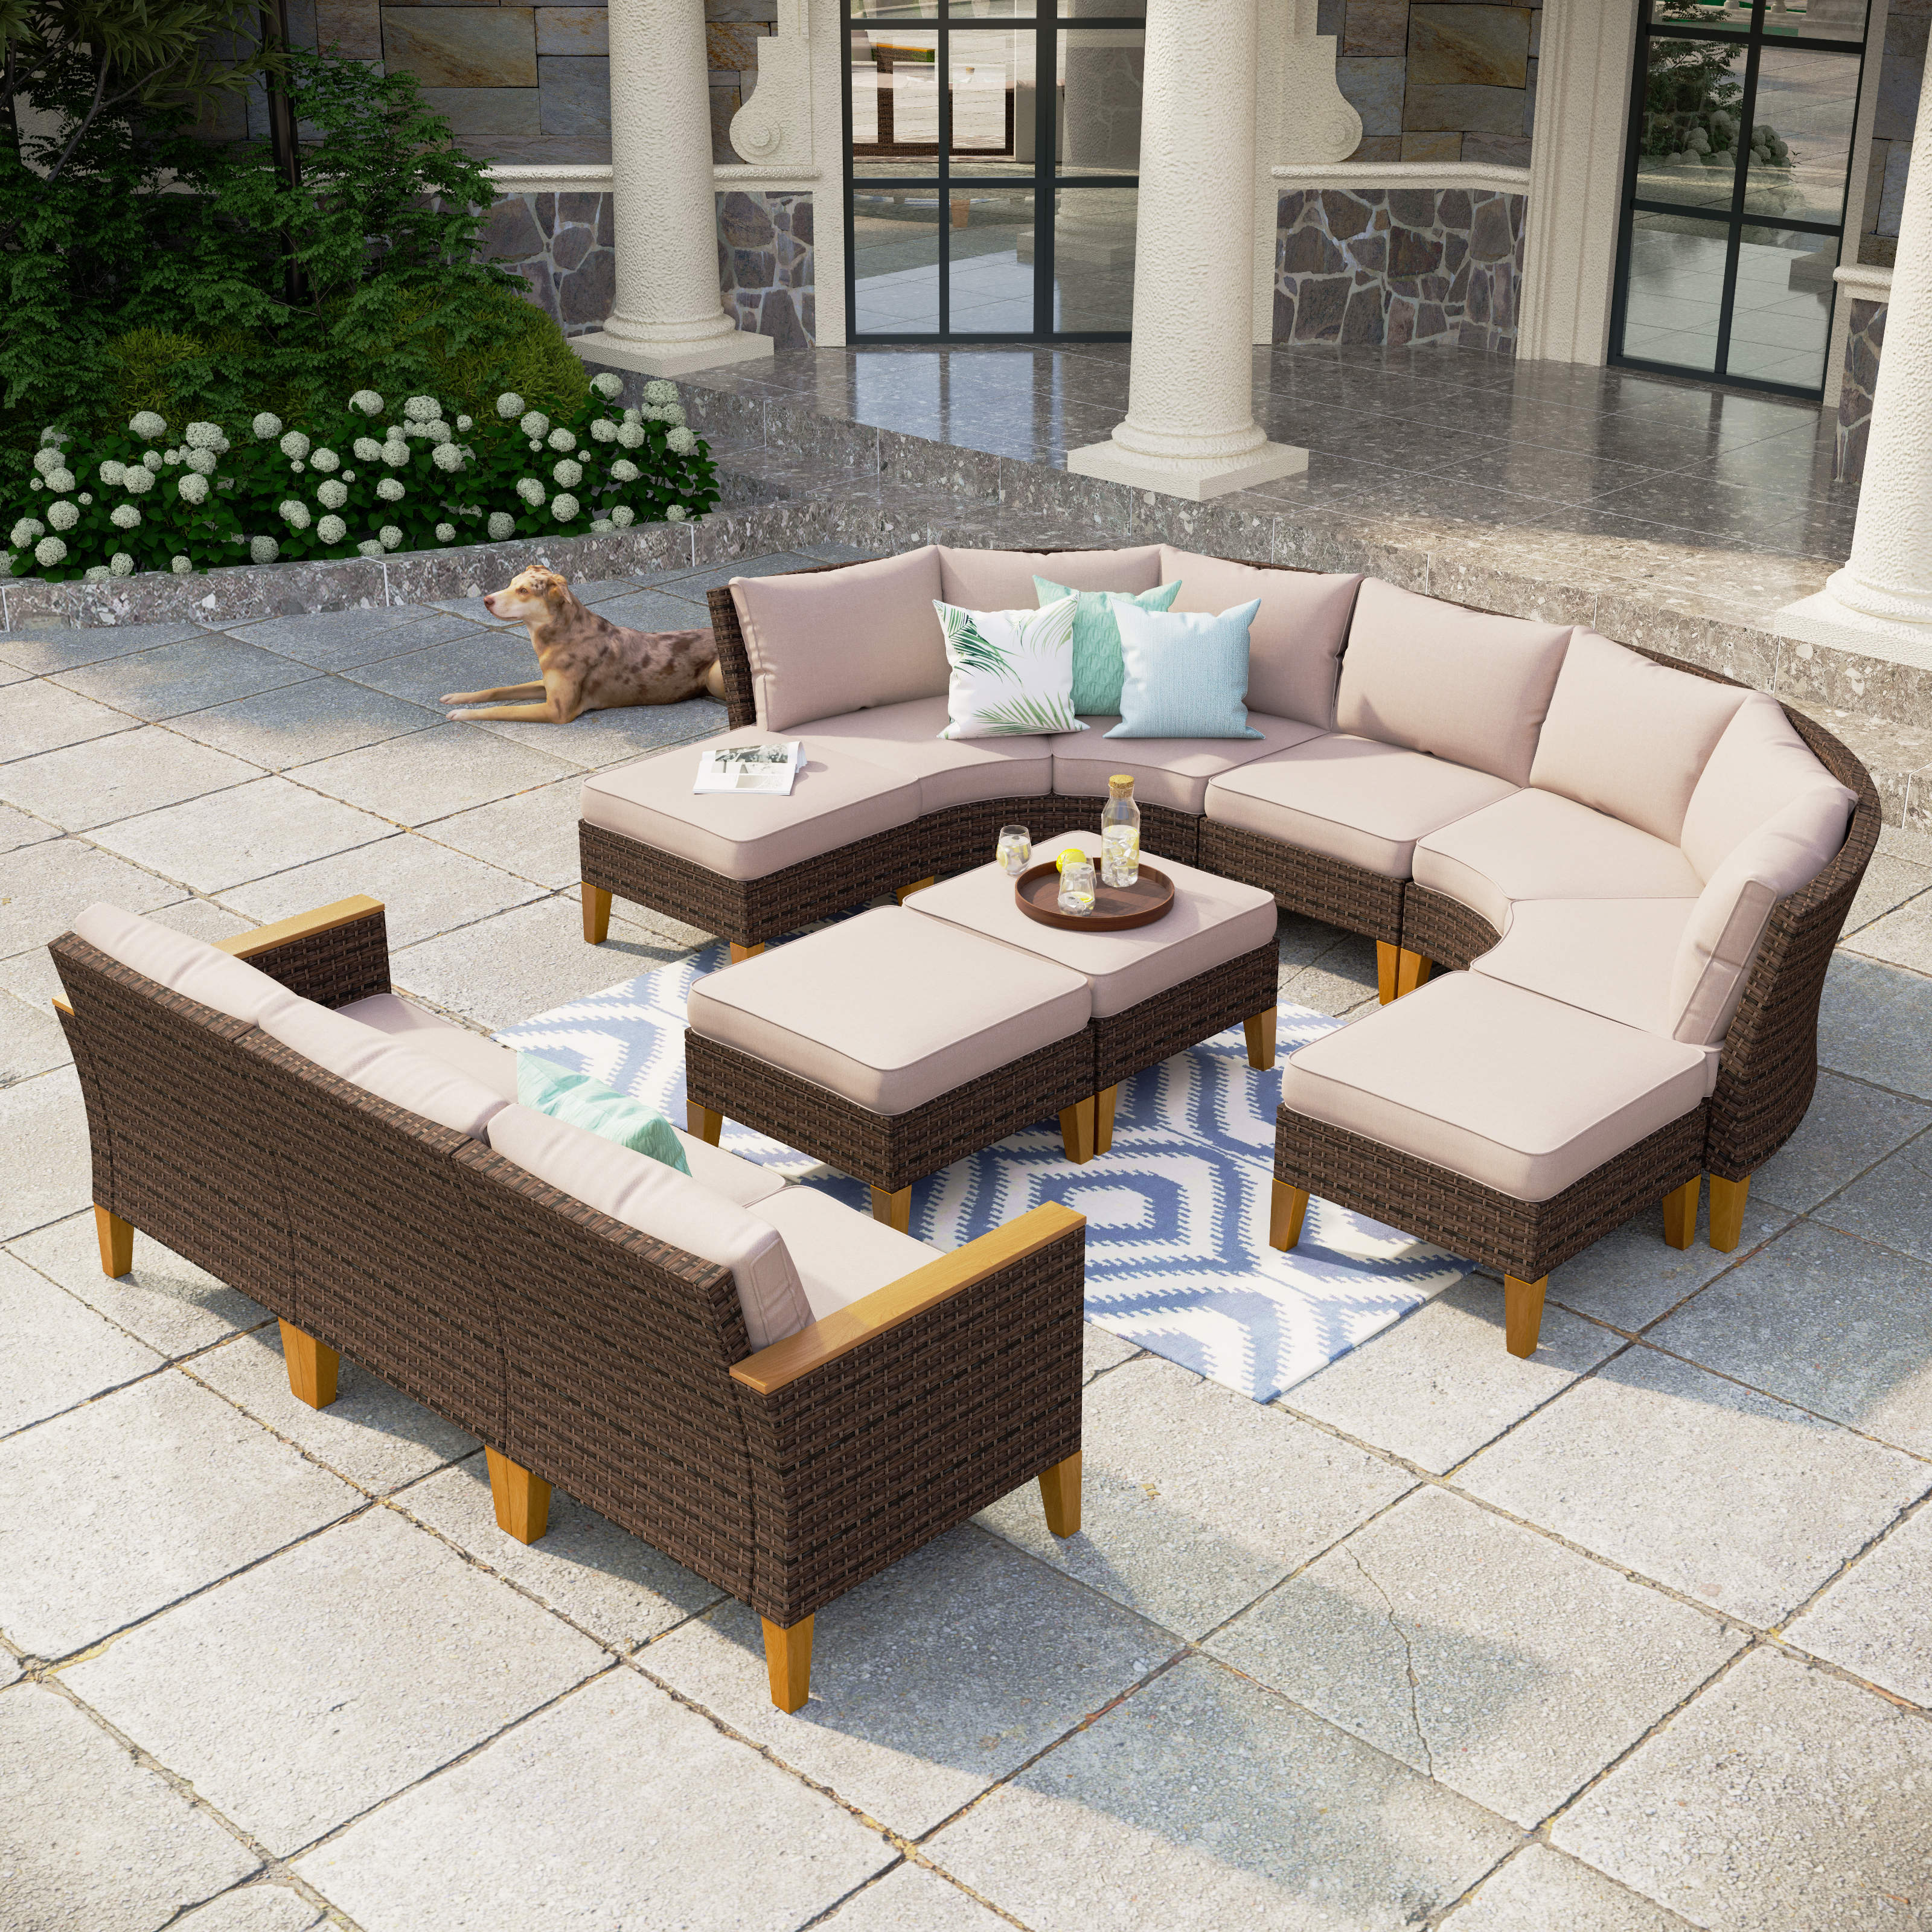 12-seat modular sofa for outdoor space with modern design